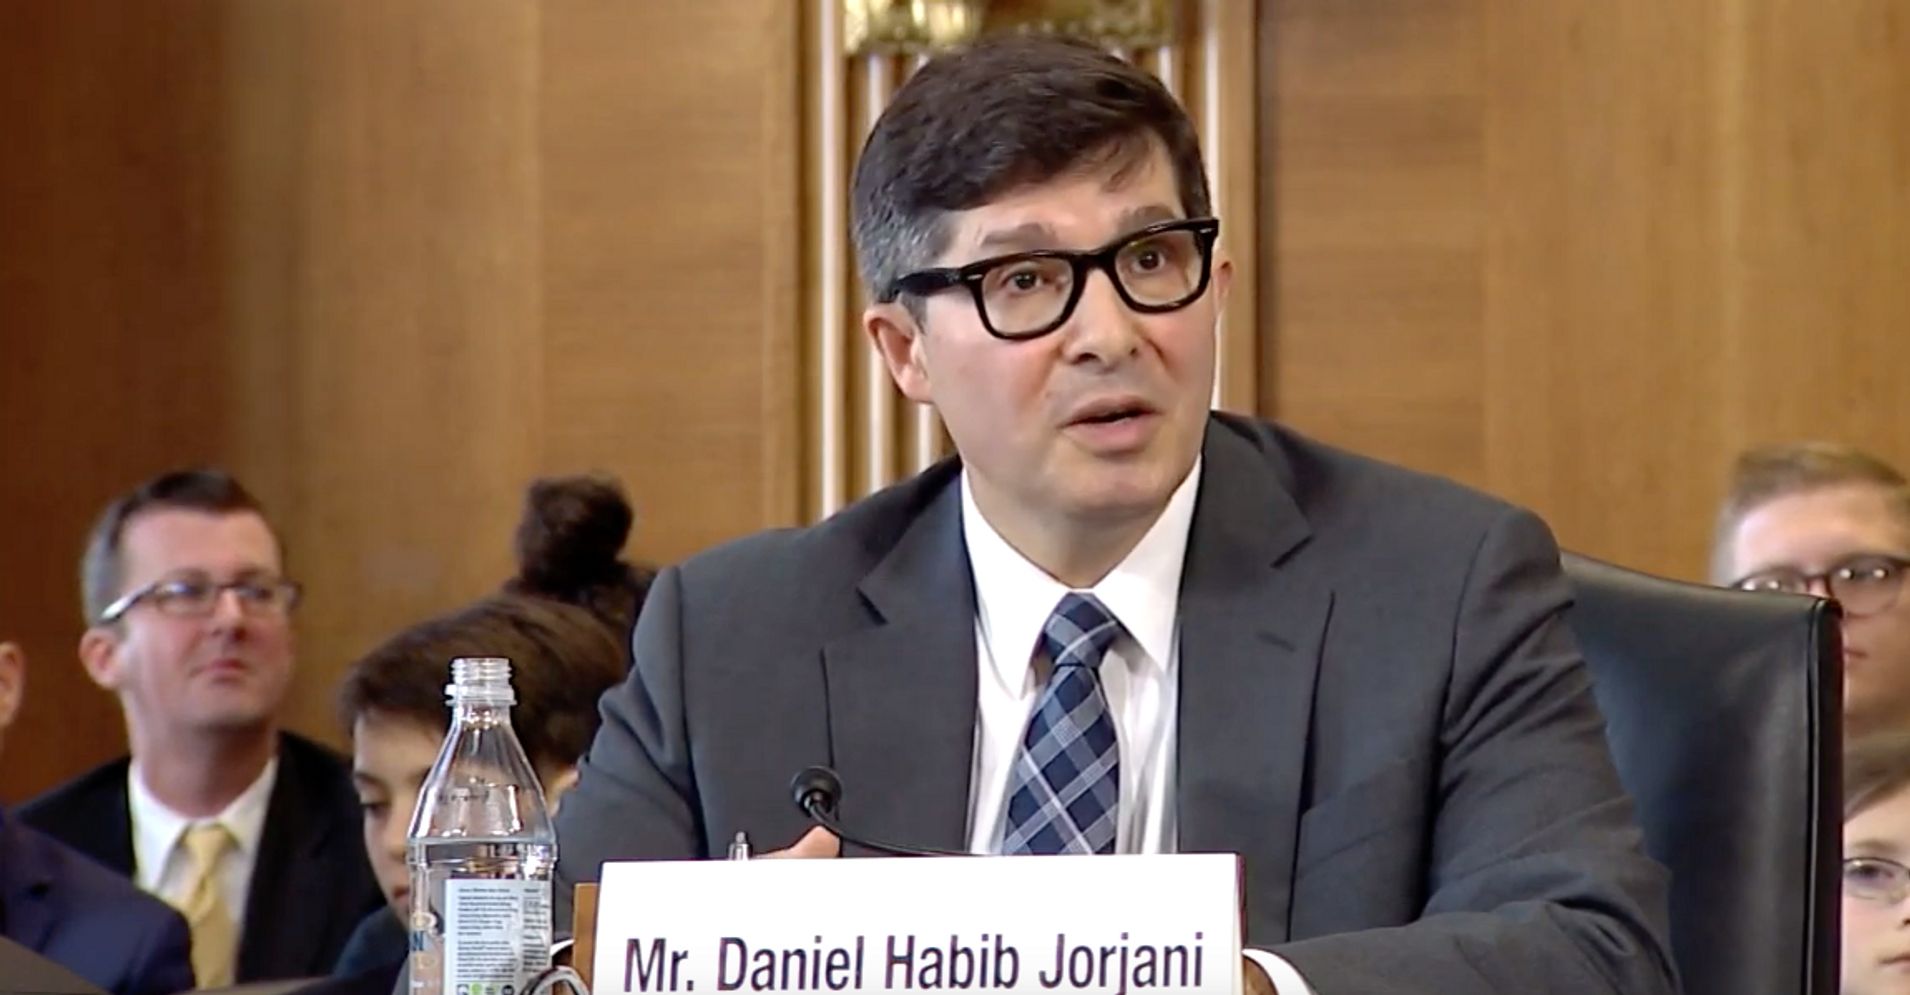 Daniel Jorjani, the nominee to serve as the Interior Department’s top lawyer